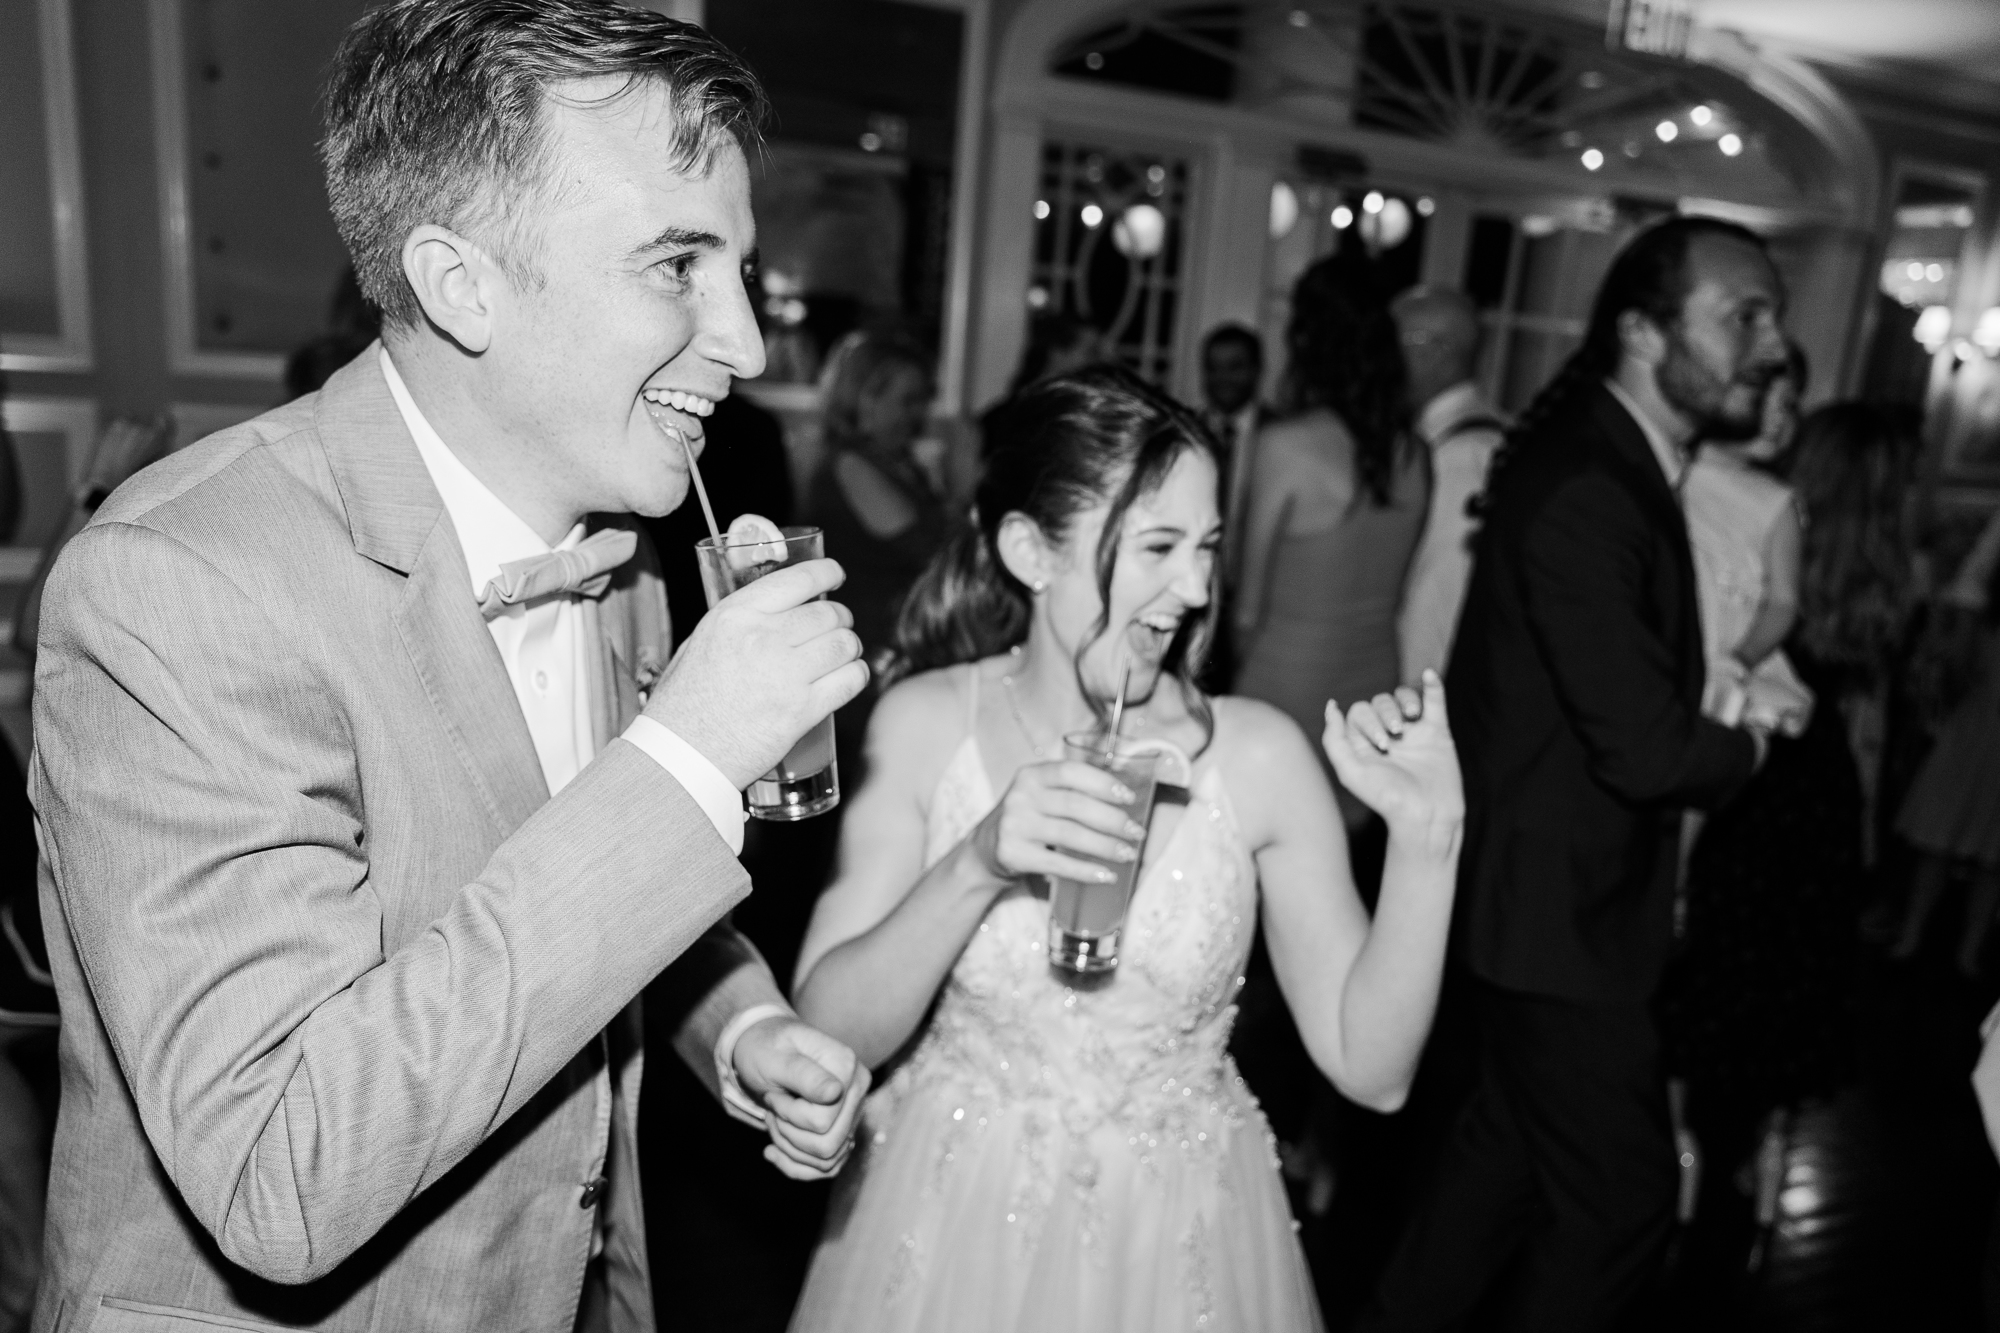 Candid Wedding at Briarcliff Manor in Summertime